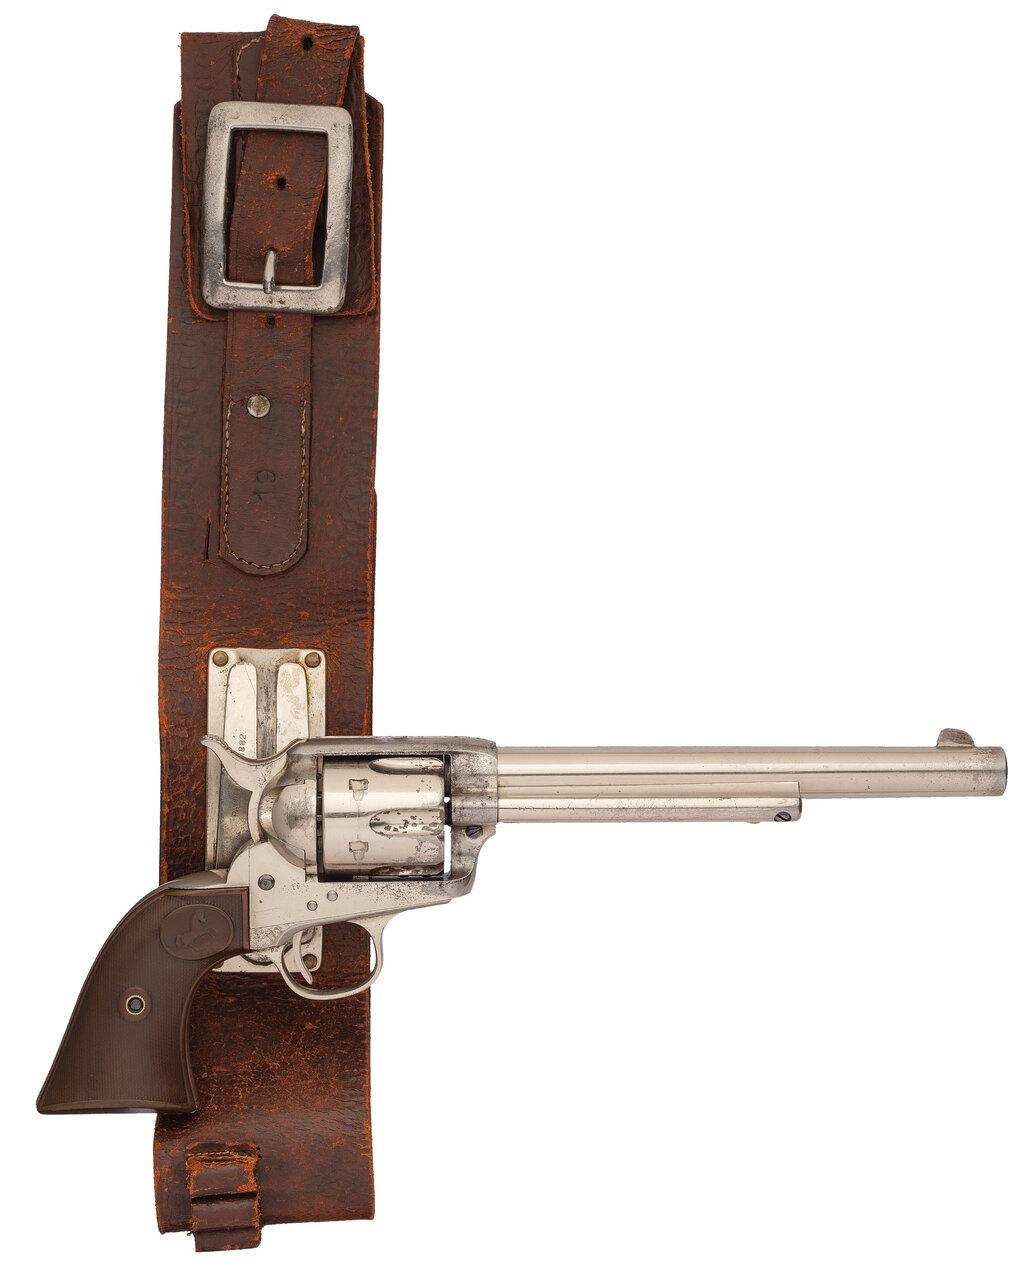 Montanan Inscribed Antique Factory Documented Colt Single Action